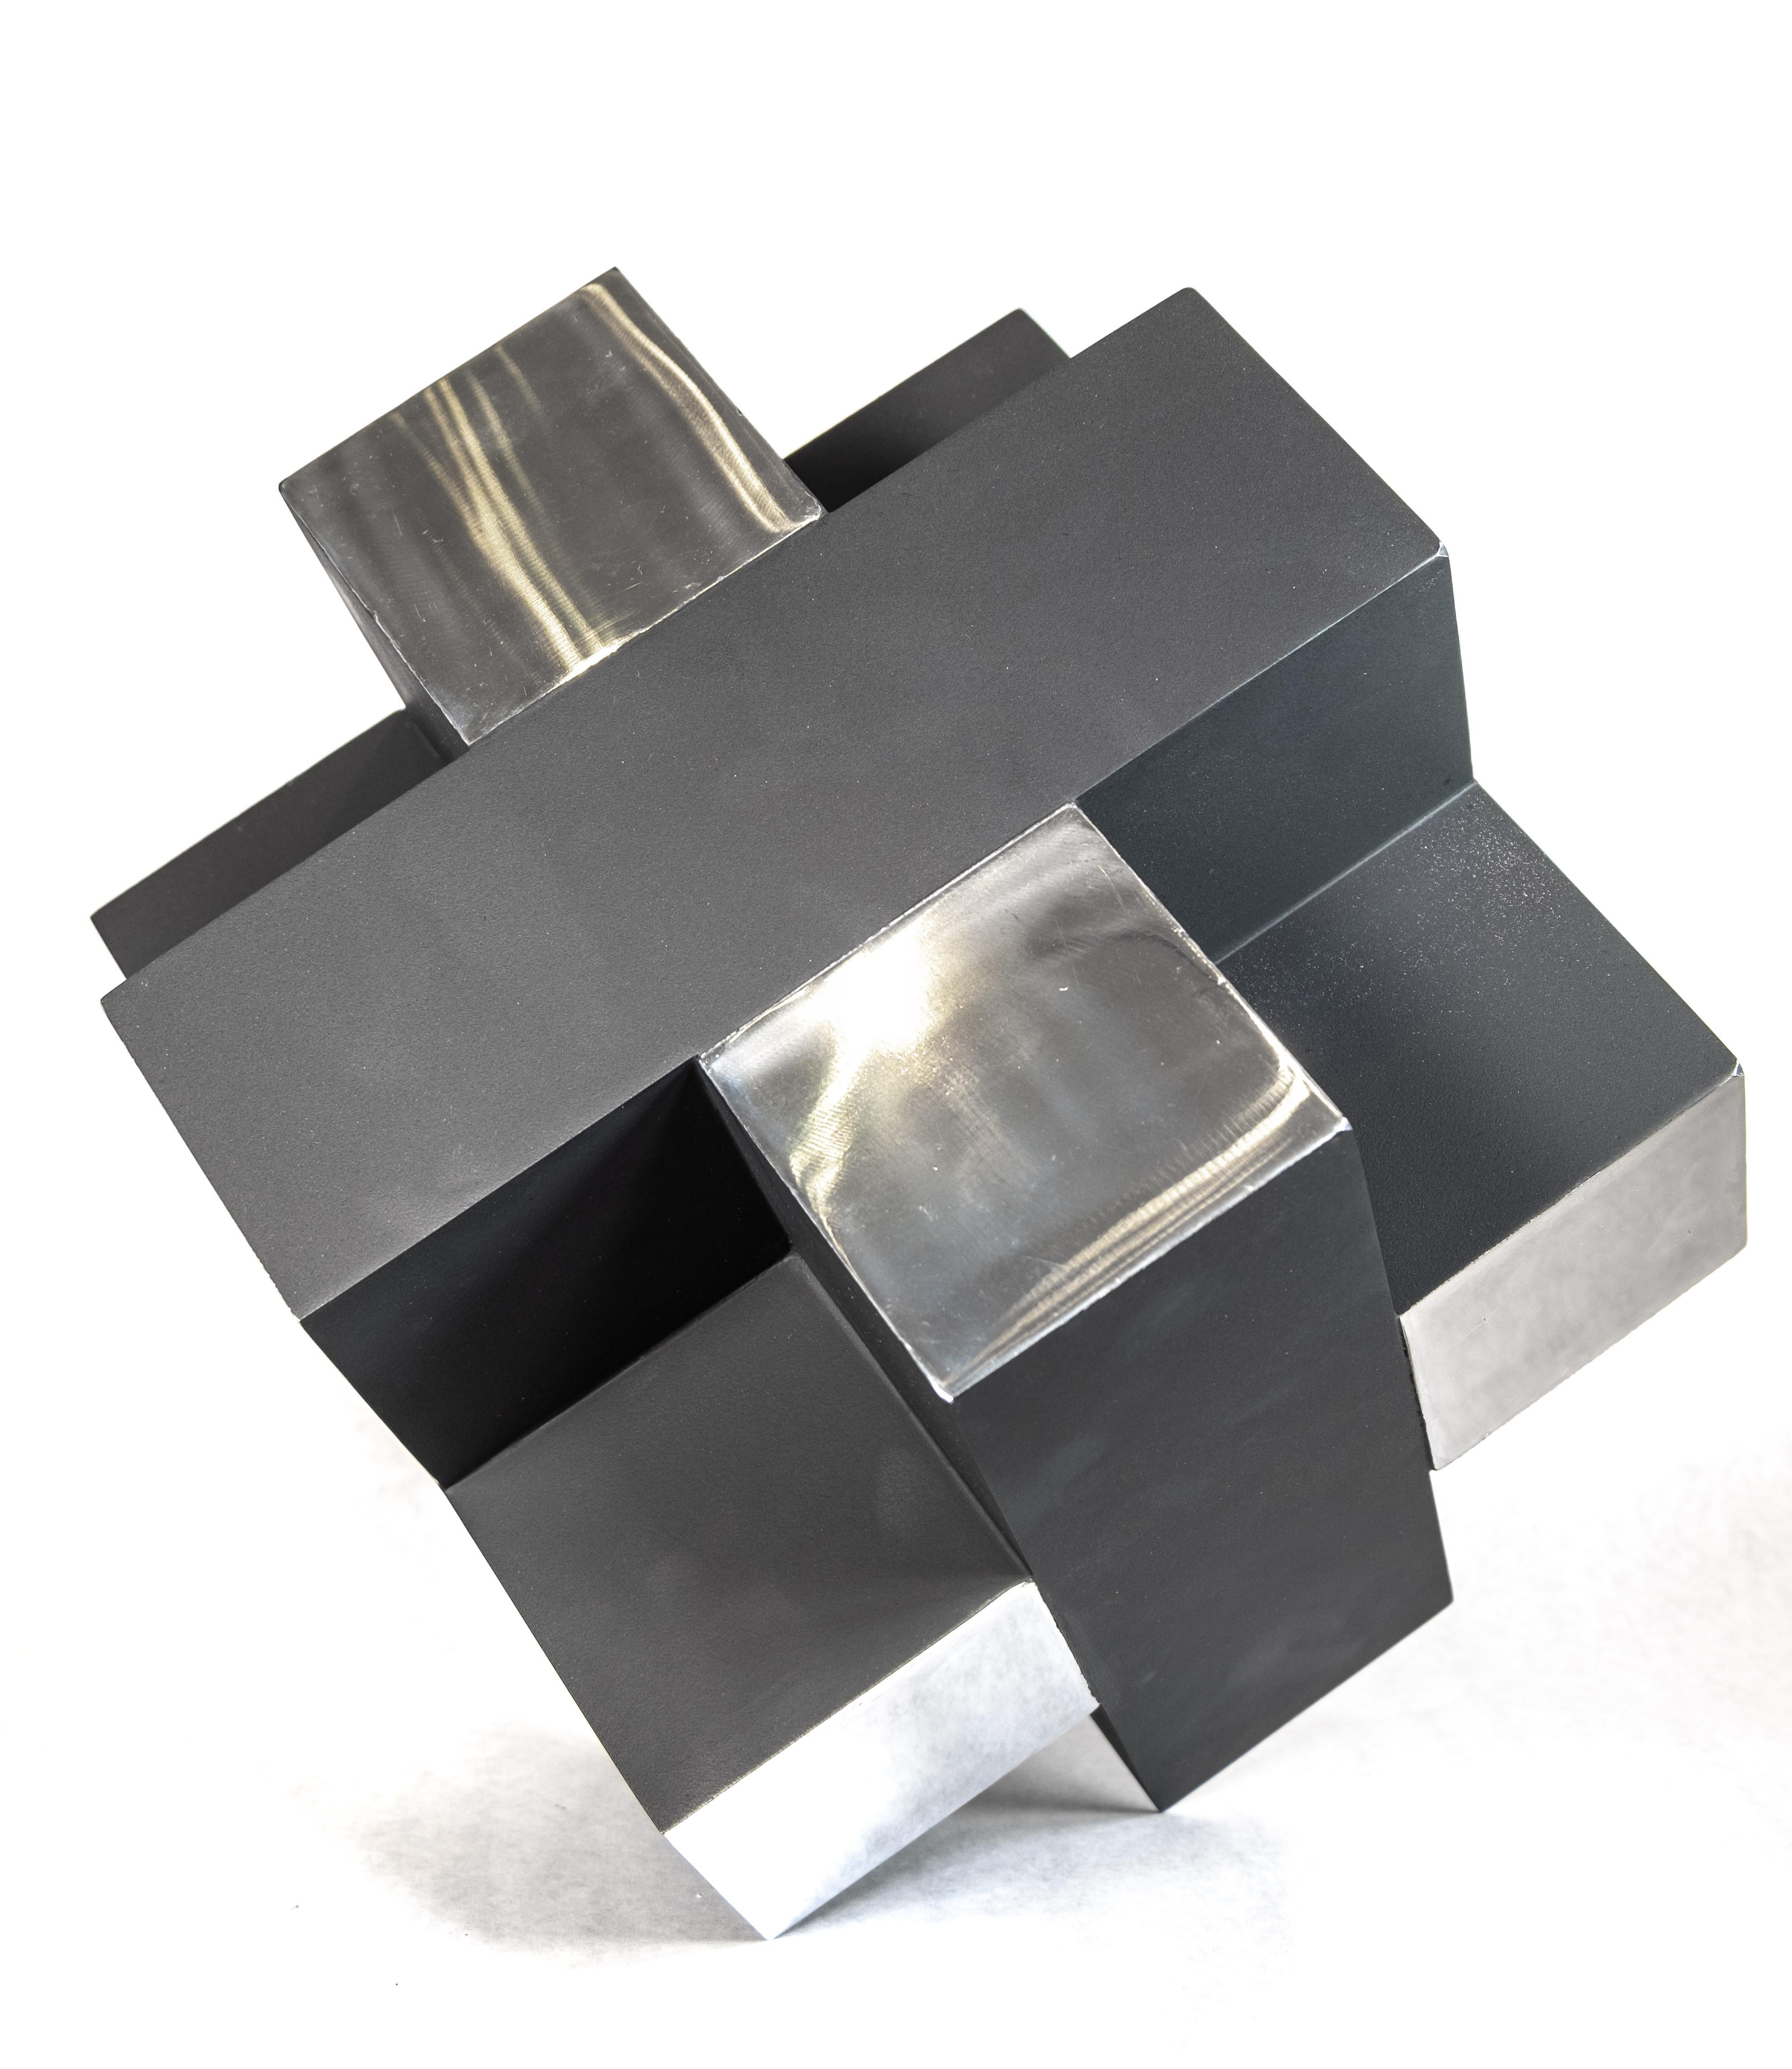 Abstract Sculpture Philippe Pallafray - 12 Inch Cube Black 1/10 - Modern, intersecting geometric, aluminum sculpture